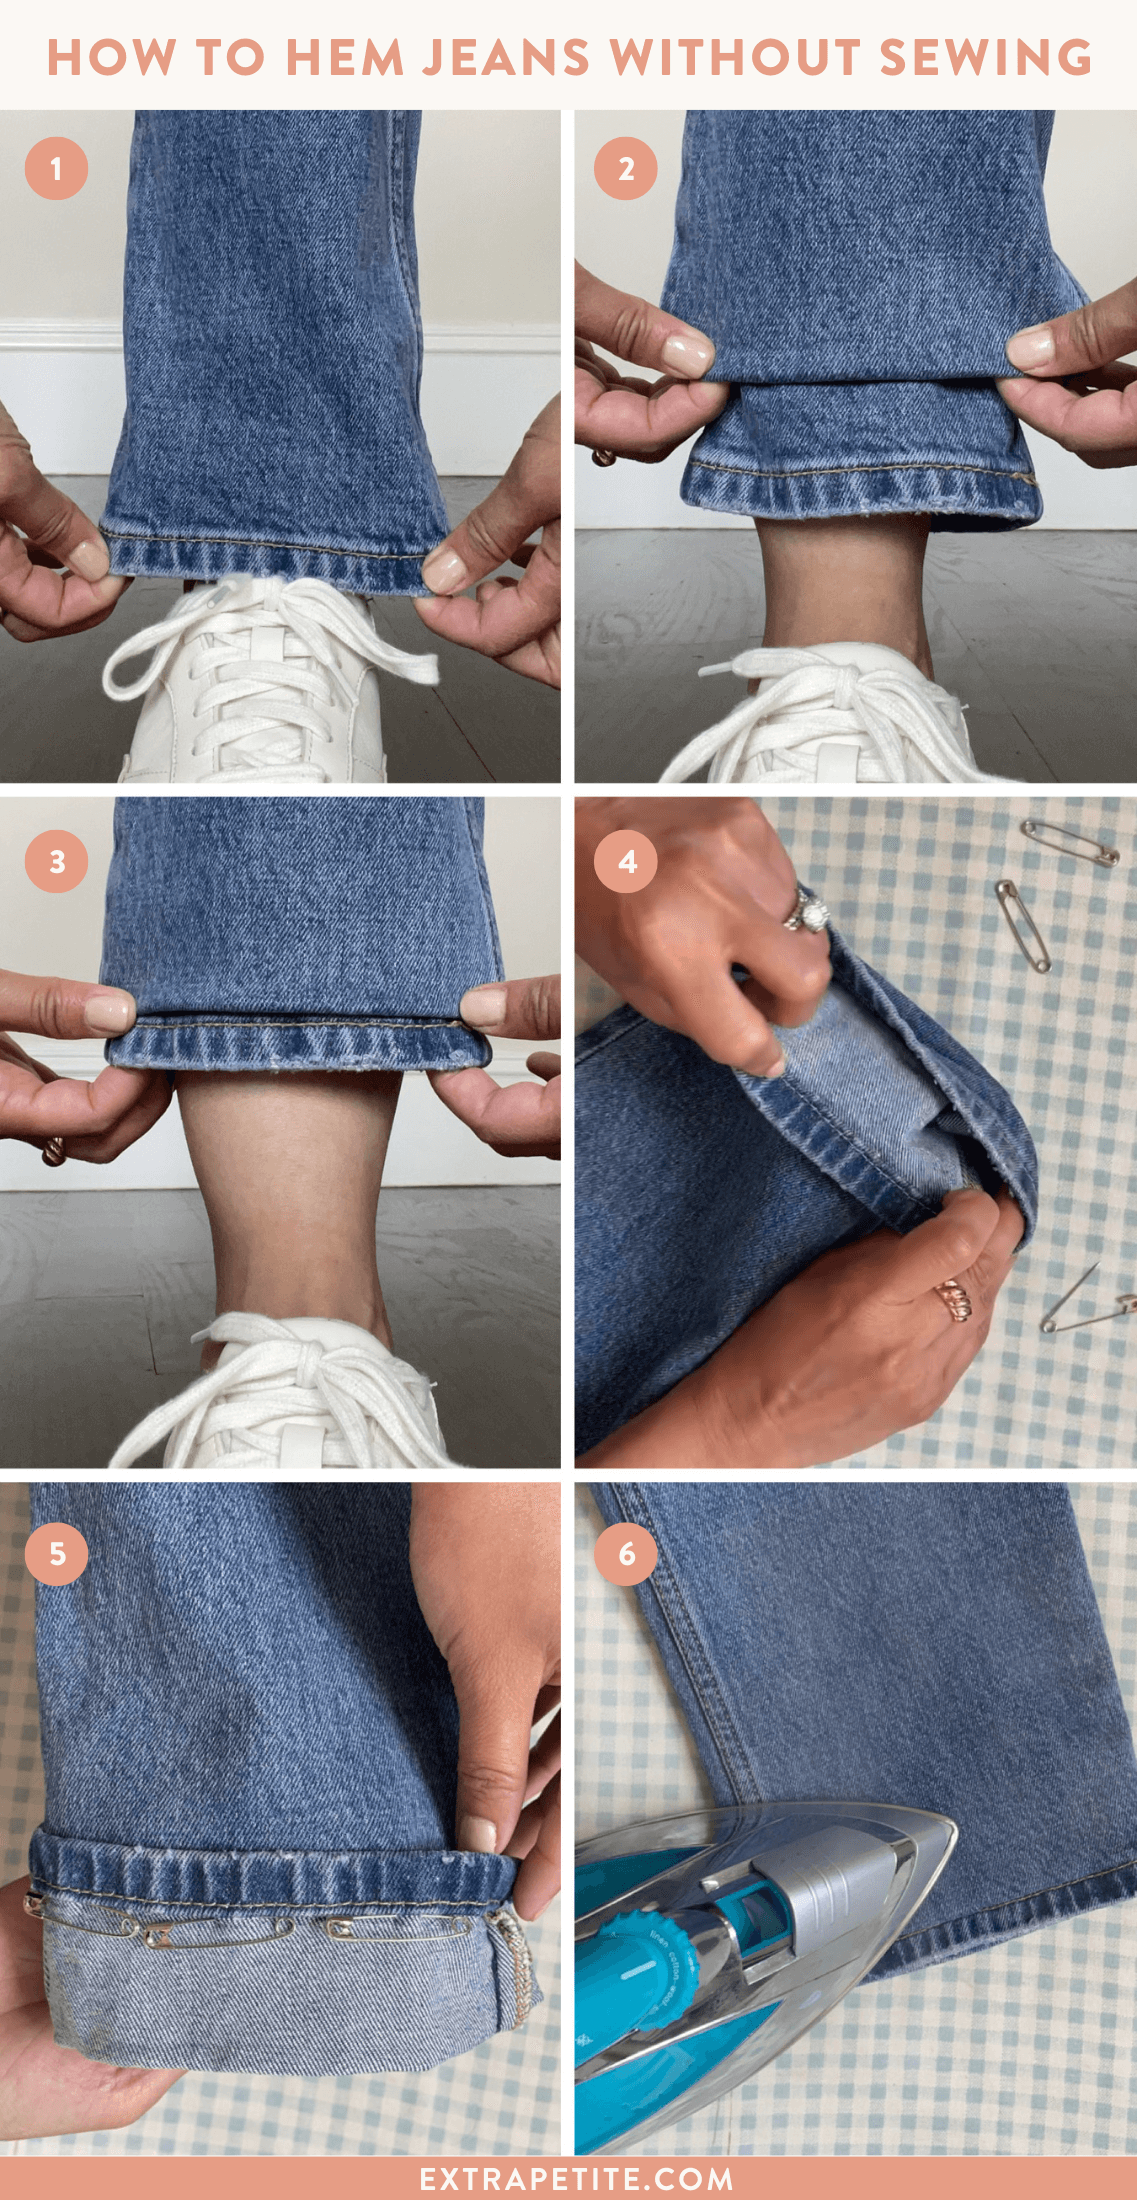 How To Hem Pants Without Cutting?